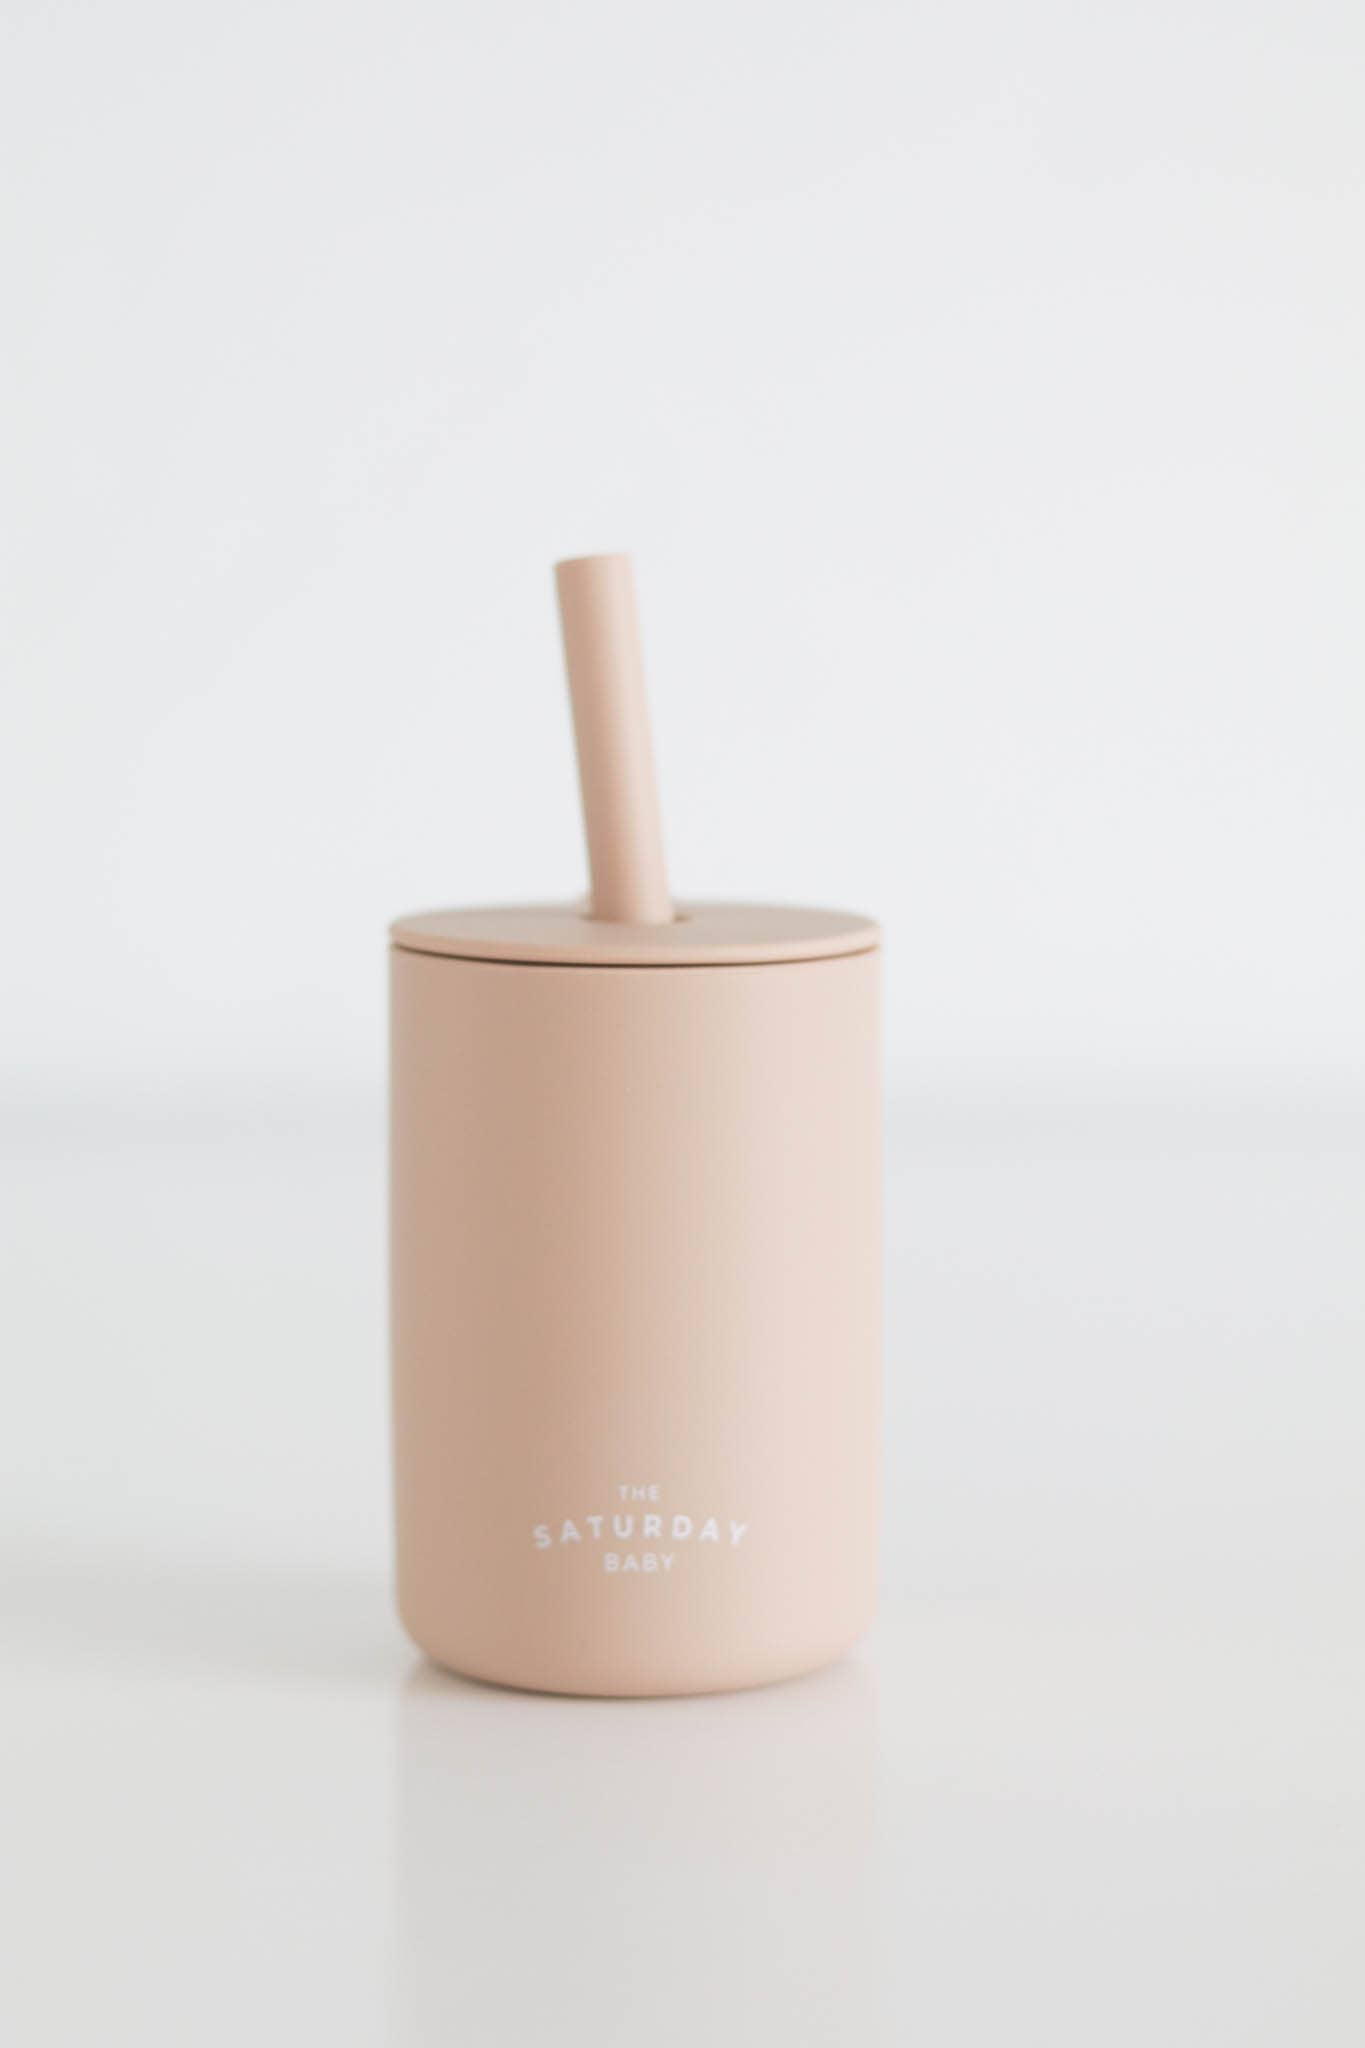 The Saturday Baby Silicone Straw Cup | Multiple Colors